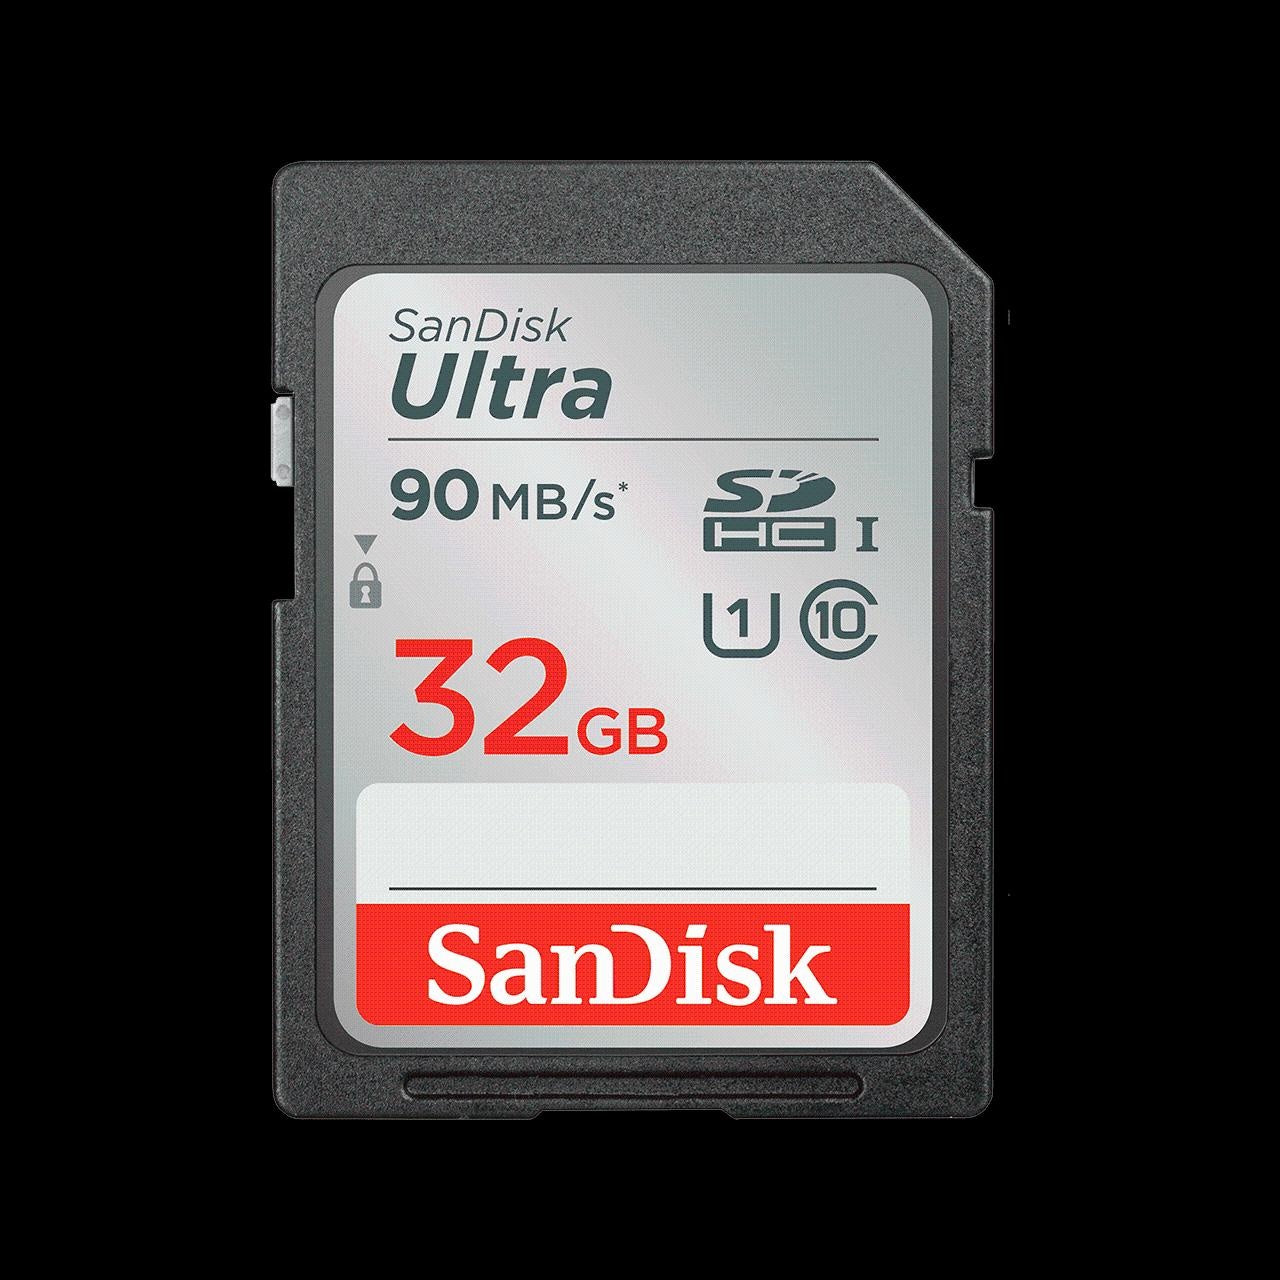 SANDISK 32GB Ultra SDHC SDXC UHS-I Memory Card 90MB/s Full HD Class 10 Speed Shock Proof Temperature Proof Water Proof X-ray Proof Digital Camera SANDISK